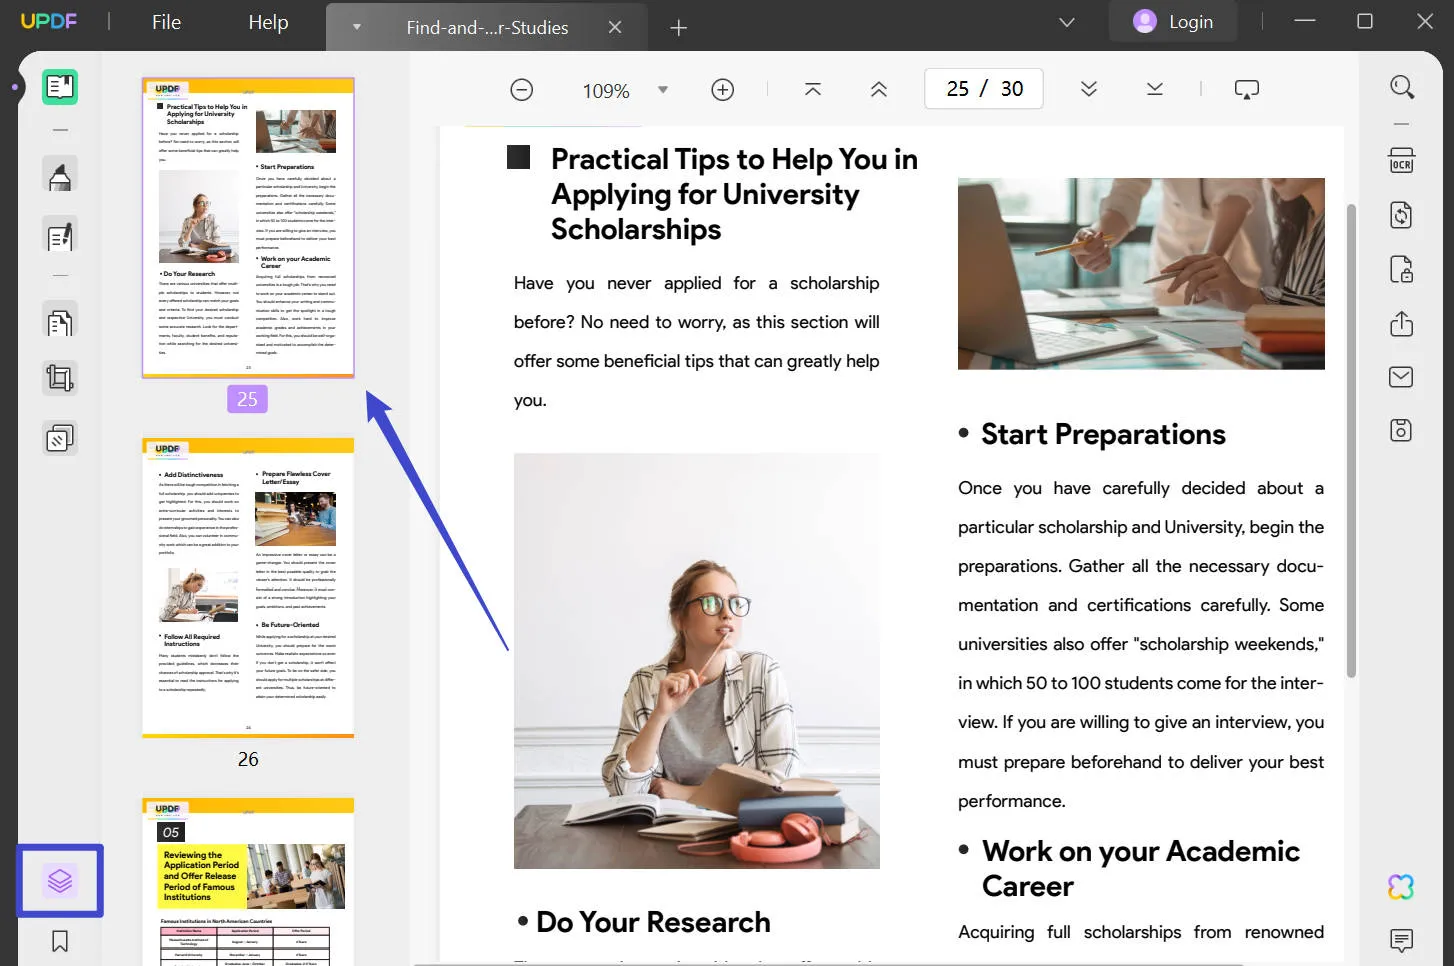 Jump to Page in PDF using the Thumbnail